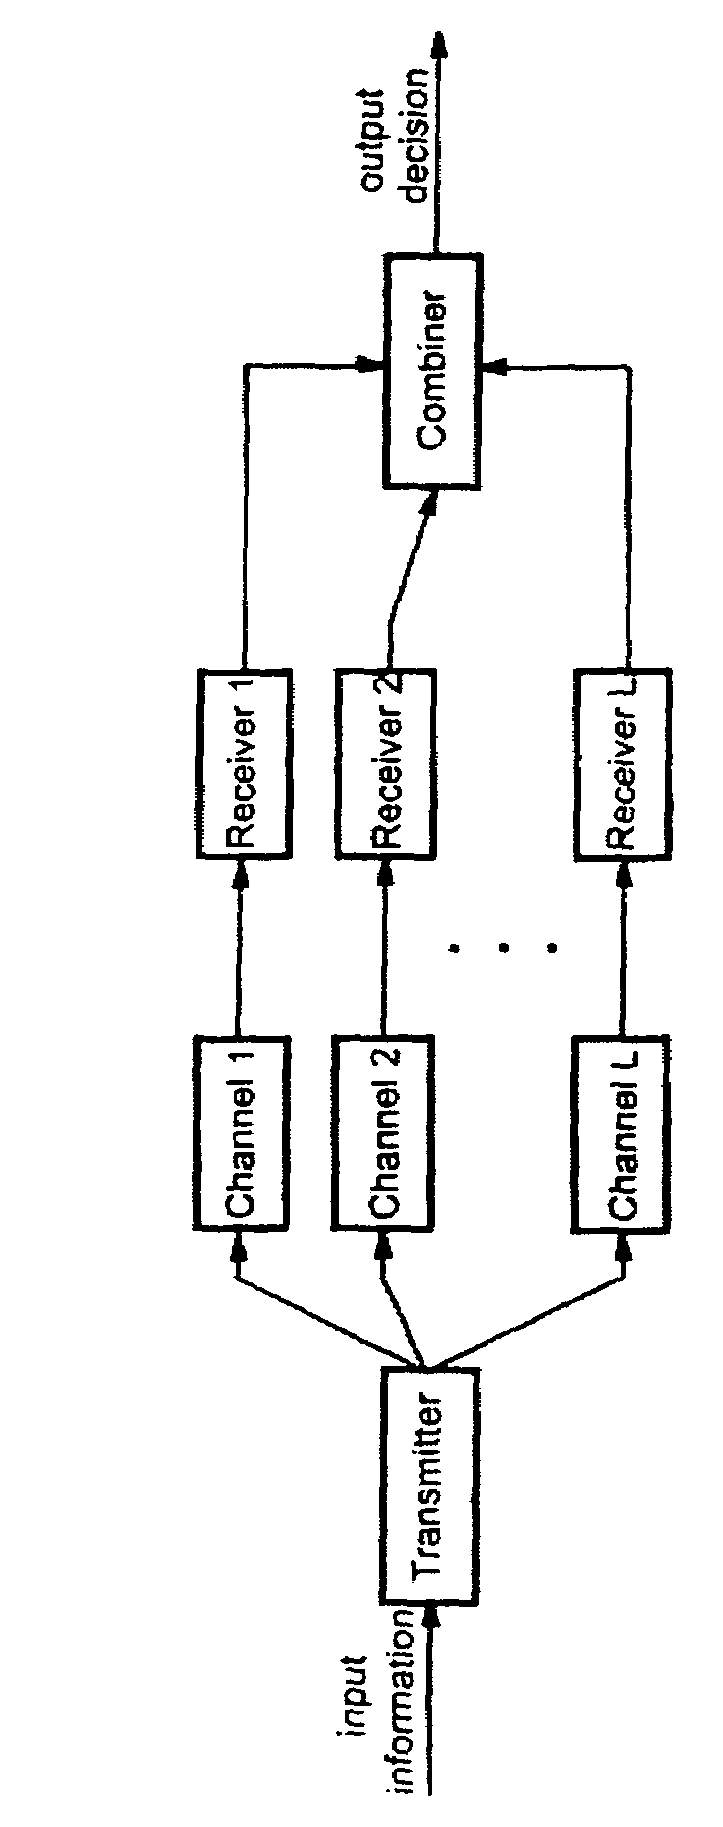 Systems and methods for correcting errors in a received frame